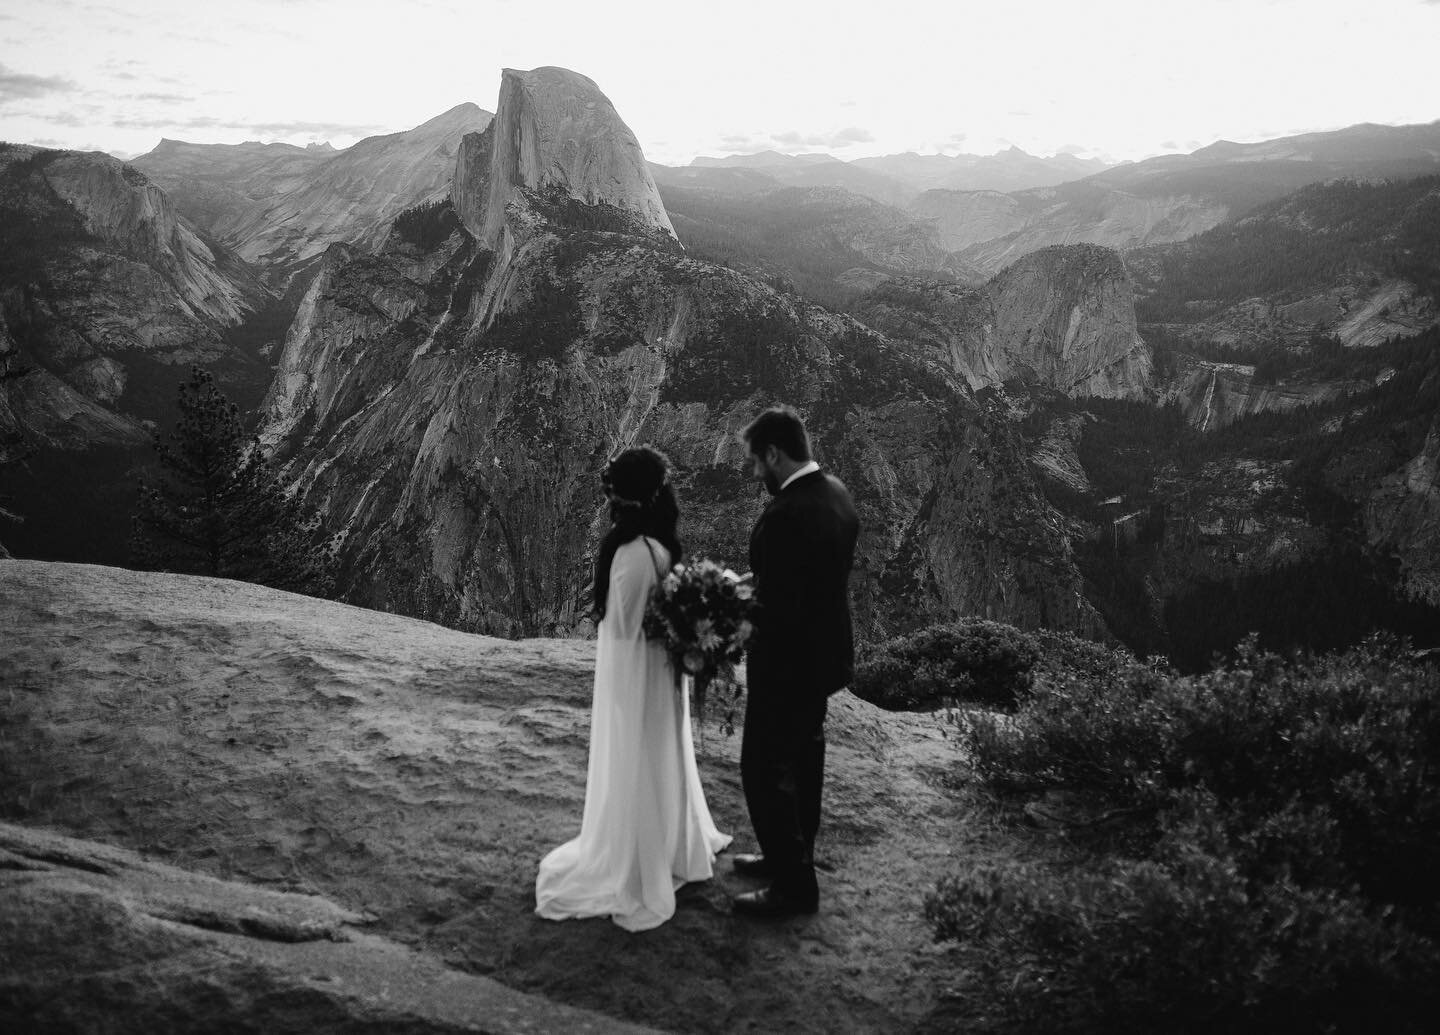 A black and white series from one of the dreamiest Yosemite elopements &mdash; forever wowed by this place and grateful for these lovely humans who I got to adventure with! ✨
.
.
.
.
.
.
.
.
.
.
.
#californiaweddingphotographer #yosemiteelopement #yo